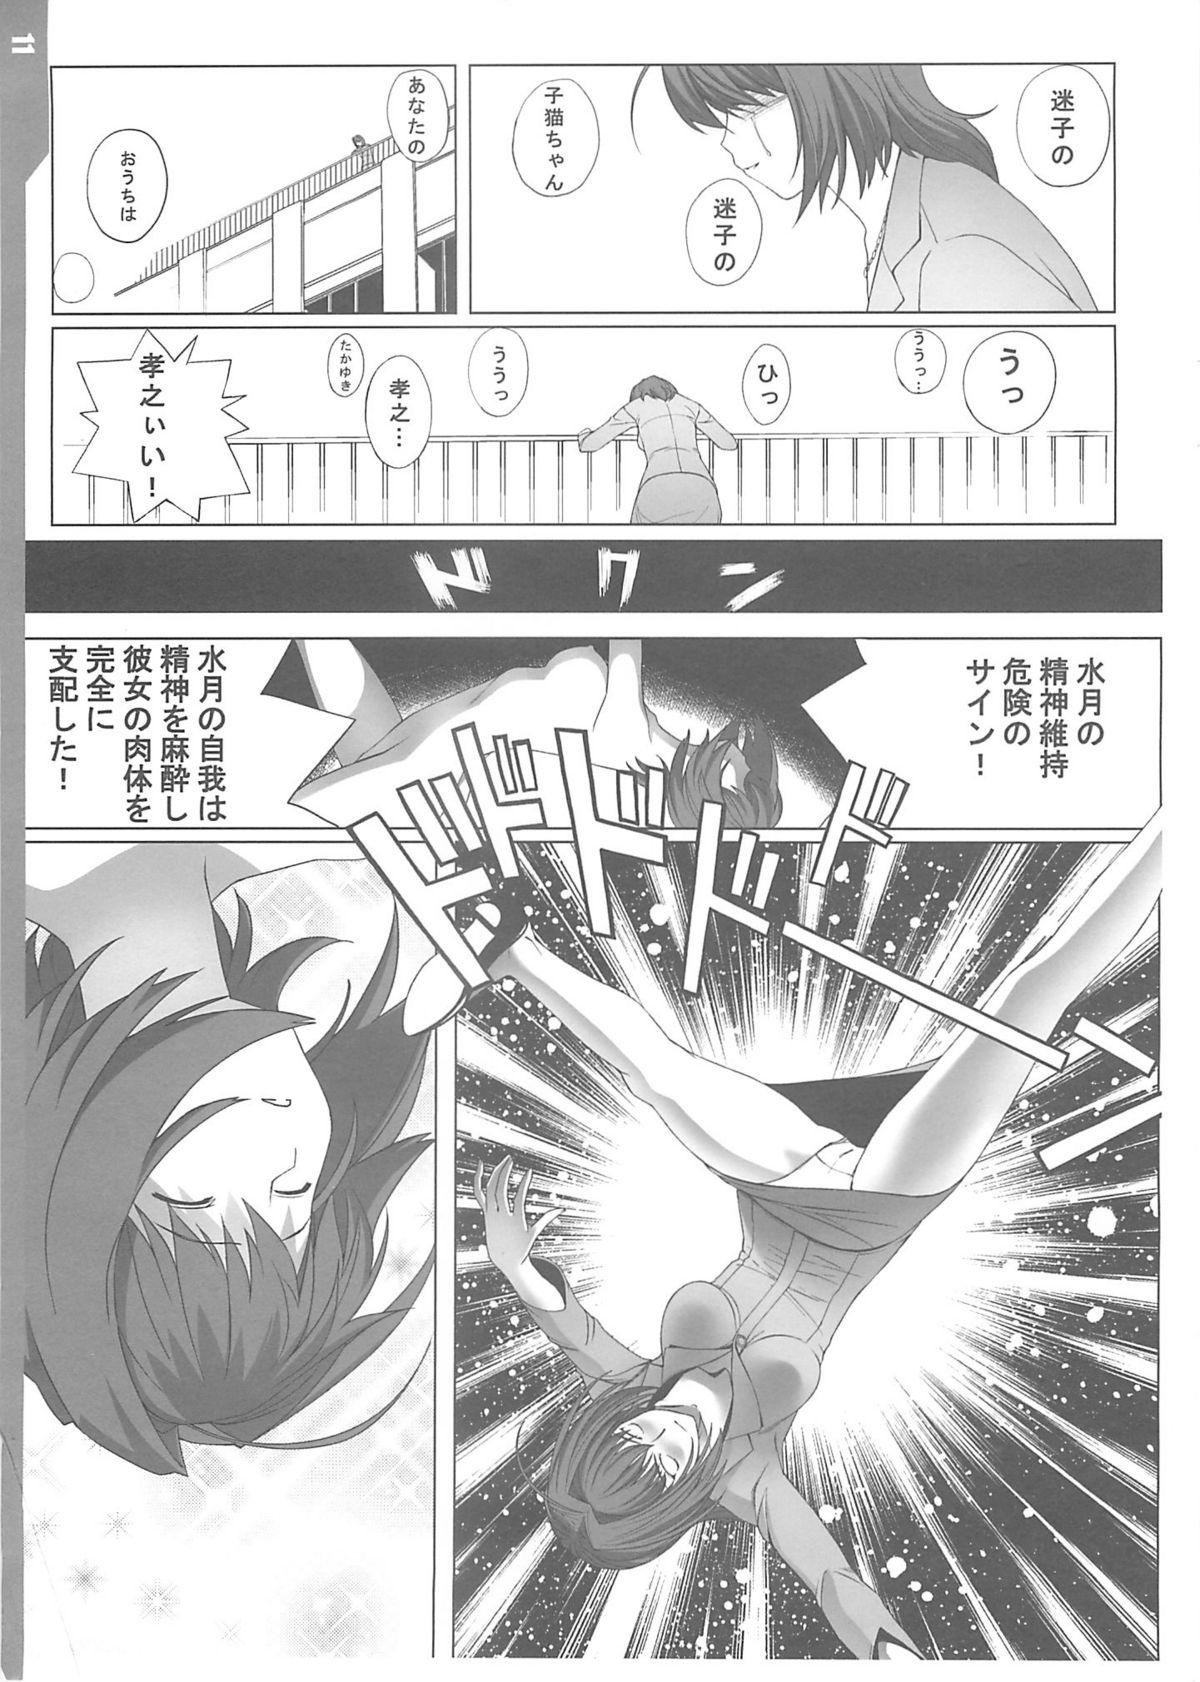 Animation Enikki Recycle 7 no Omake Hon - Beat Angel - The idolmaster Dando - Page 11